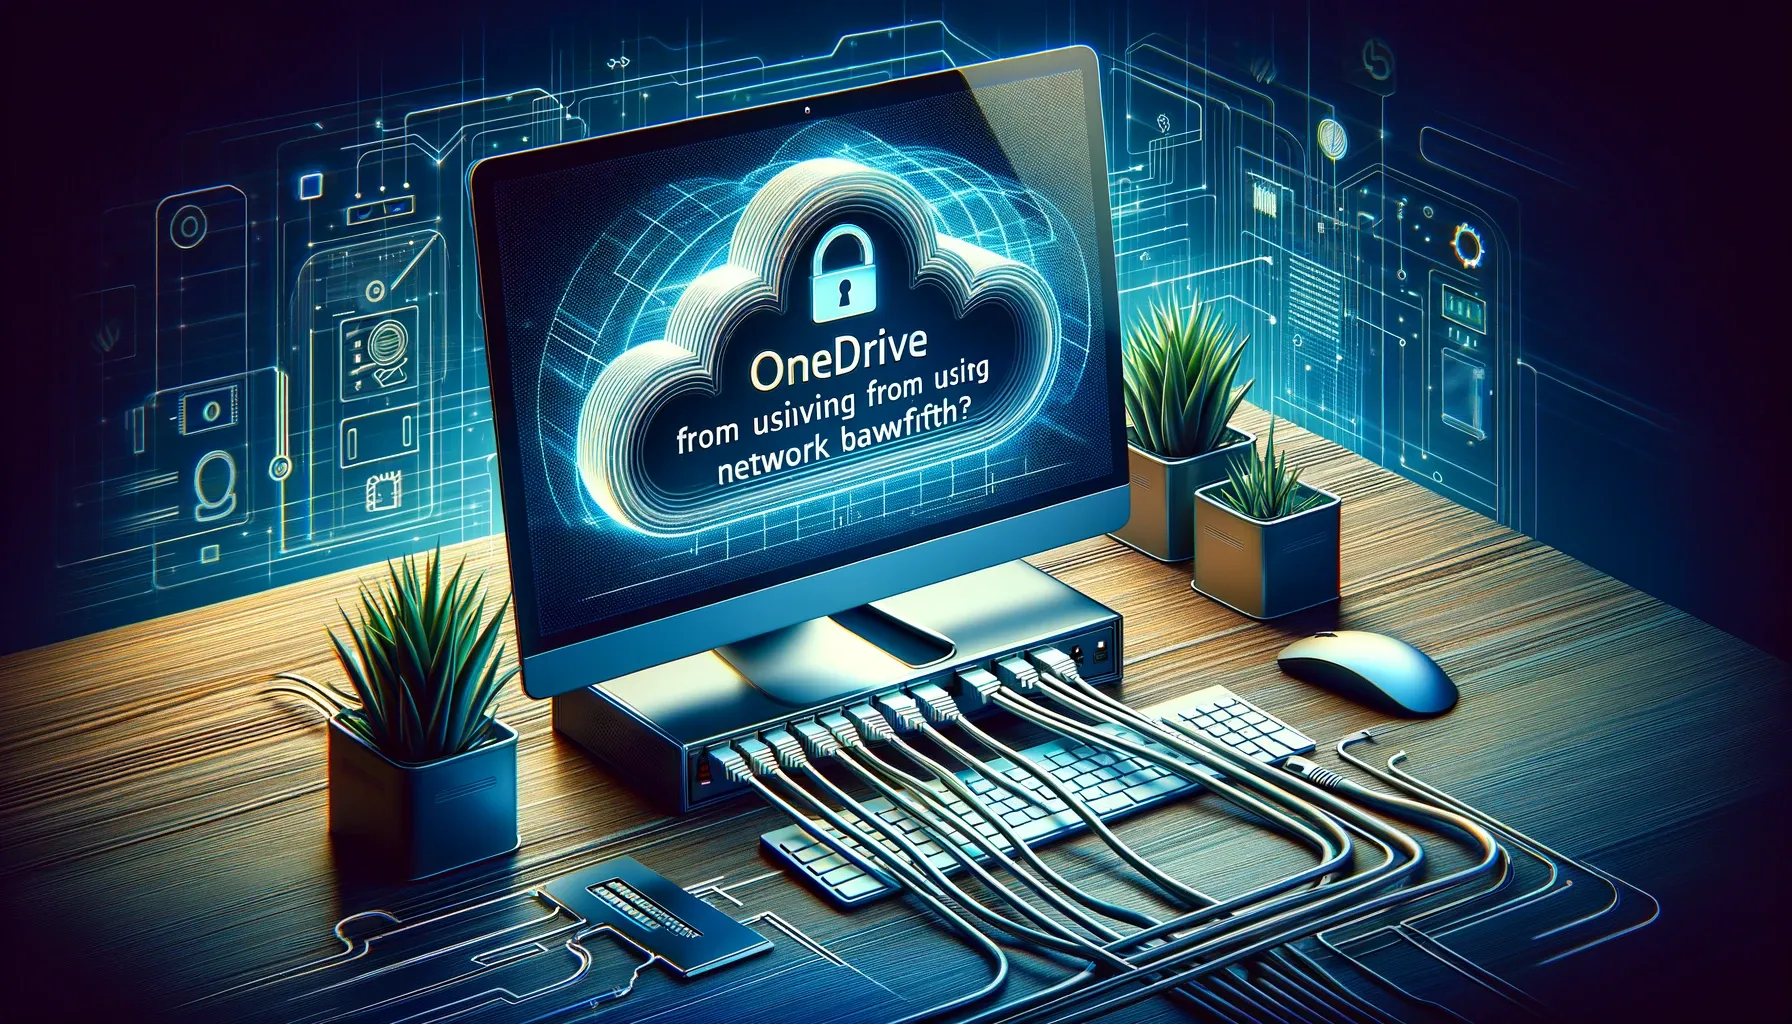 How to Prevent OneDrive from using Network Bandwidth?